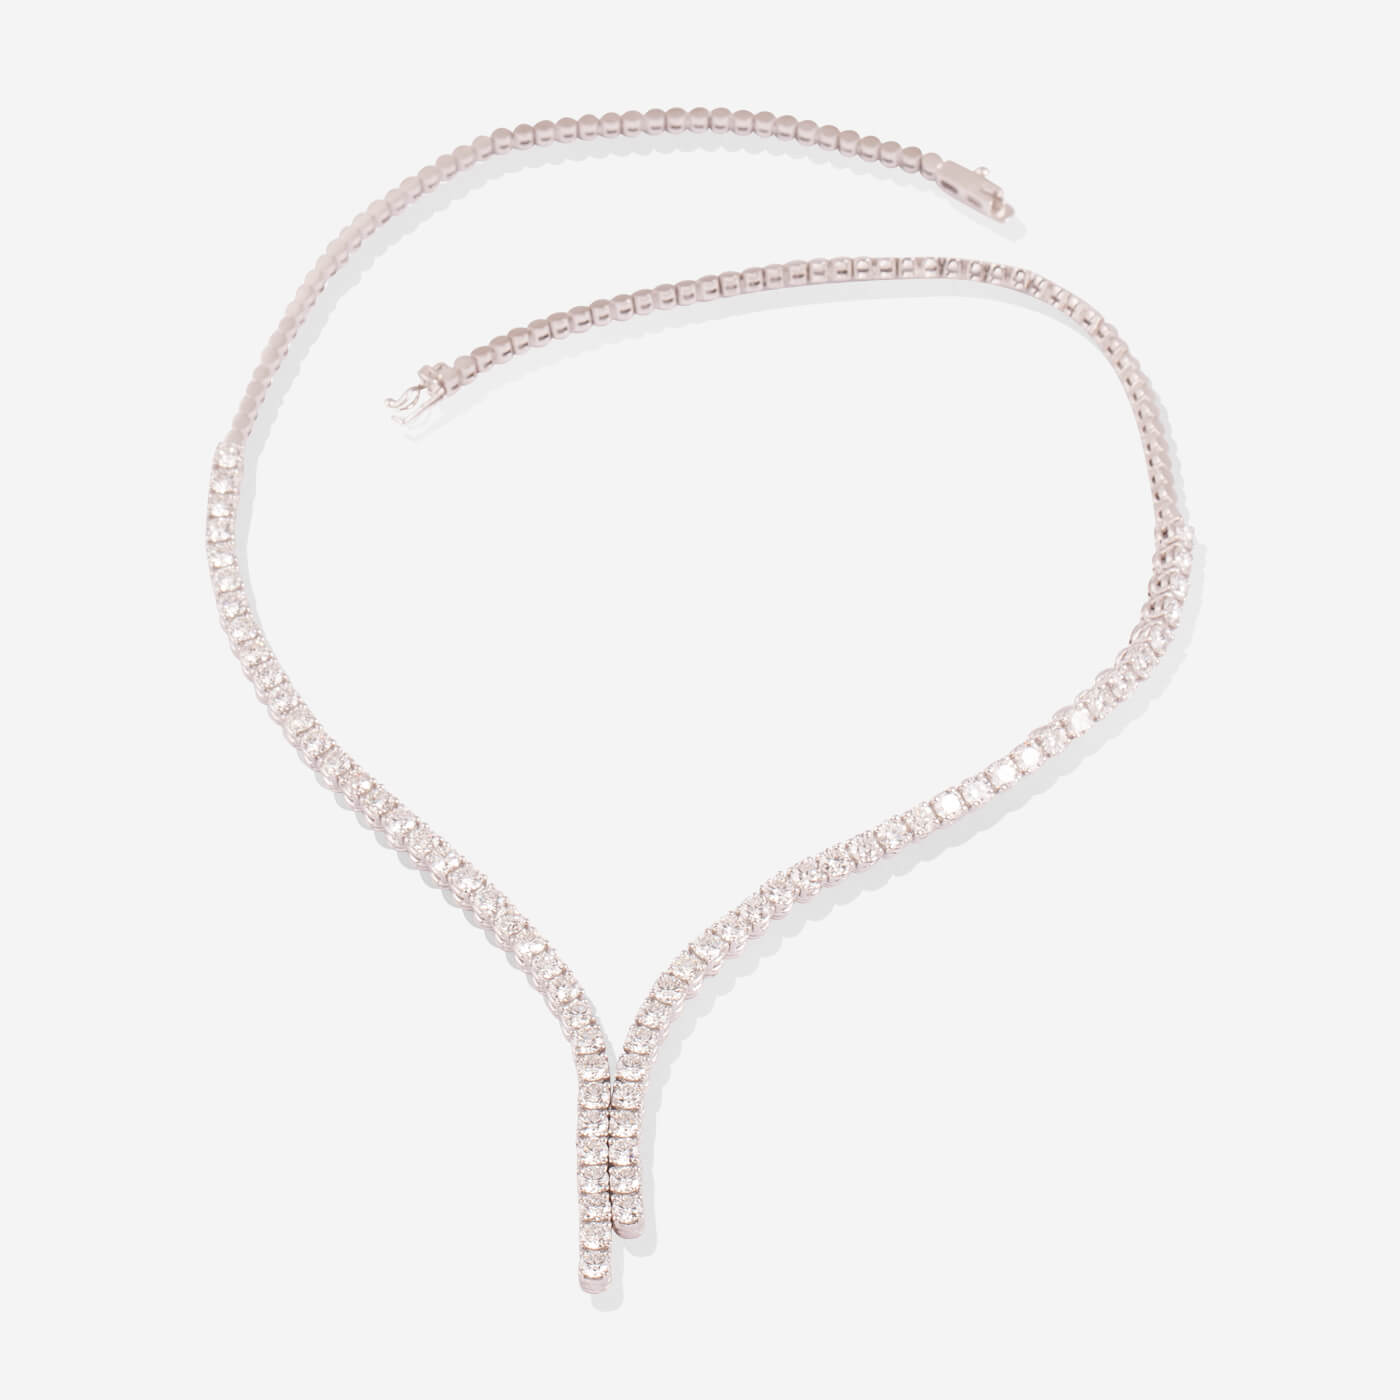 White Gold 2 Lines Diamonds Necklace - Ref: RG03018